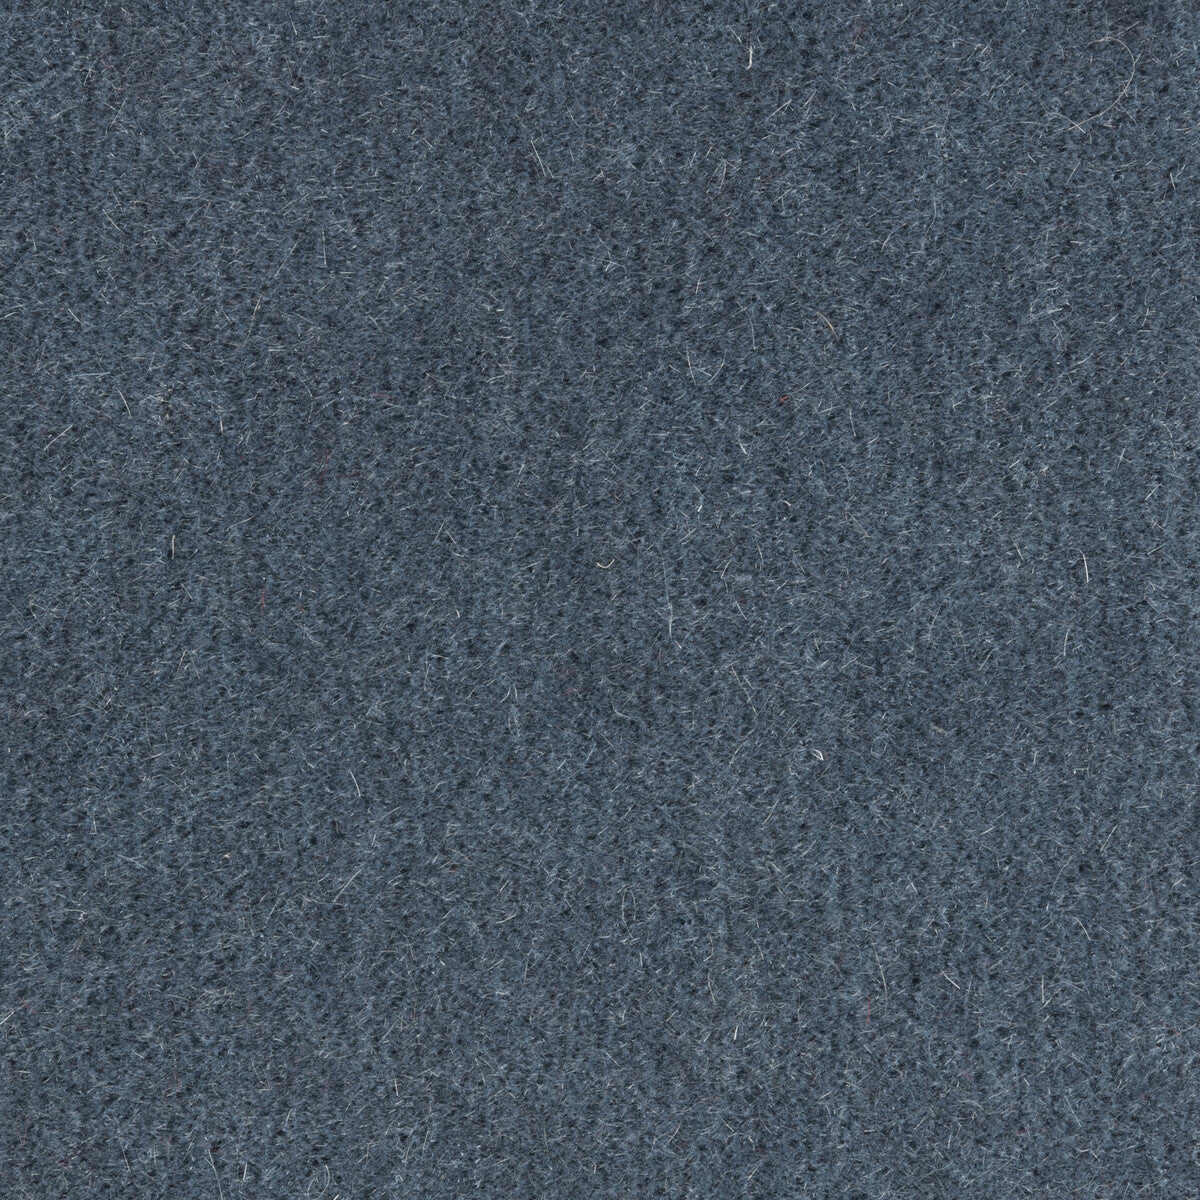 Bachelor Mohair fabric in stone blue color - pattern 8014101.5.0 - by Brunschwig &amp; Fils